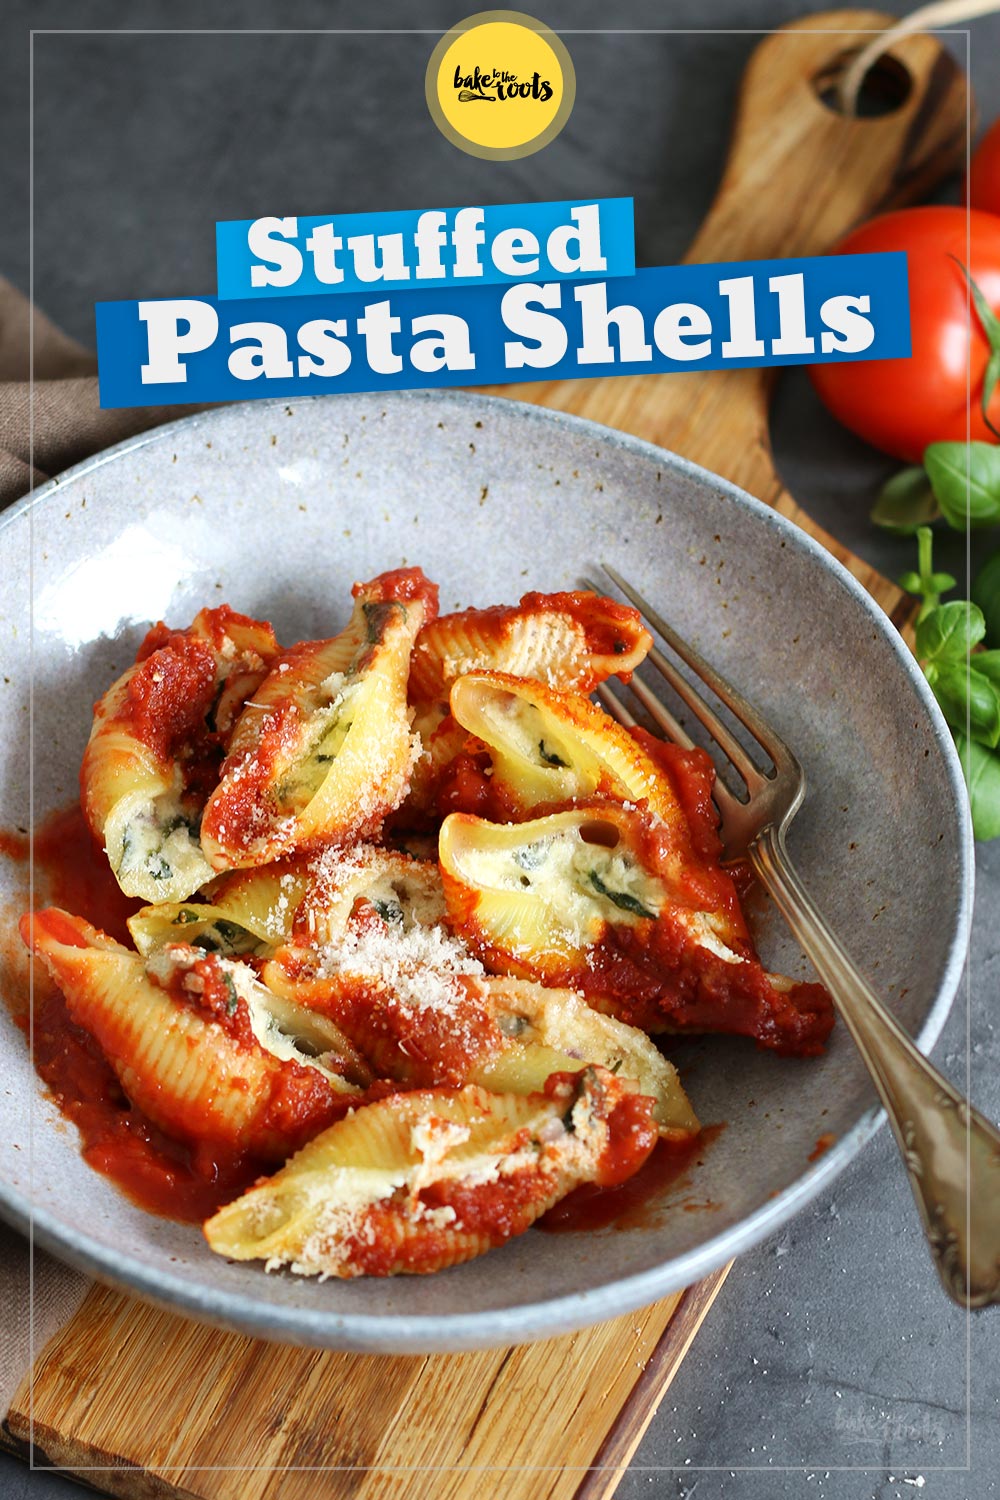 Spinach and Ricotta Stuffed Pasta Shells | Bake to the roots